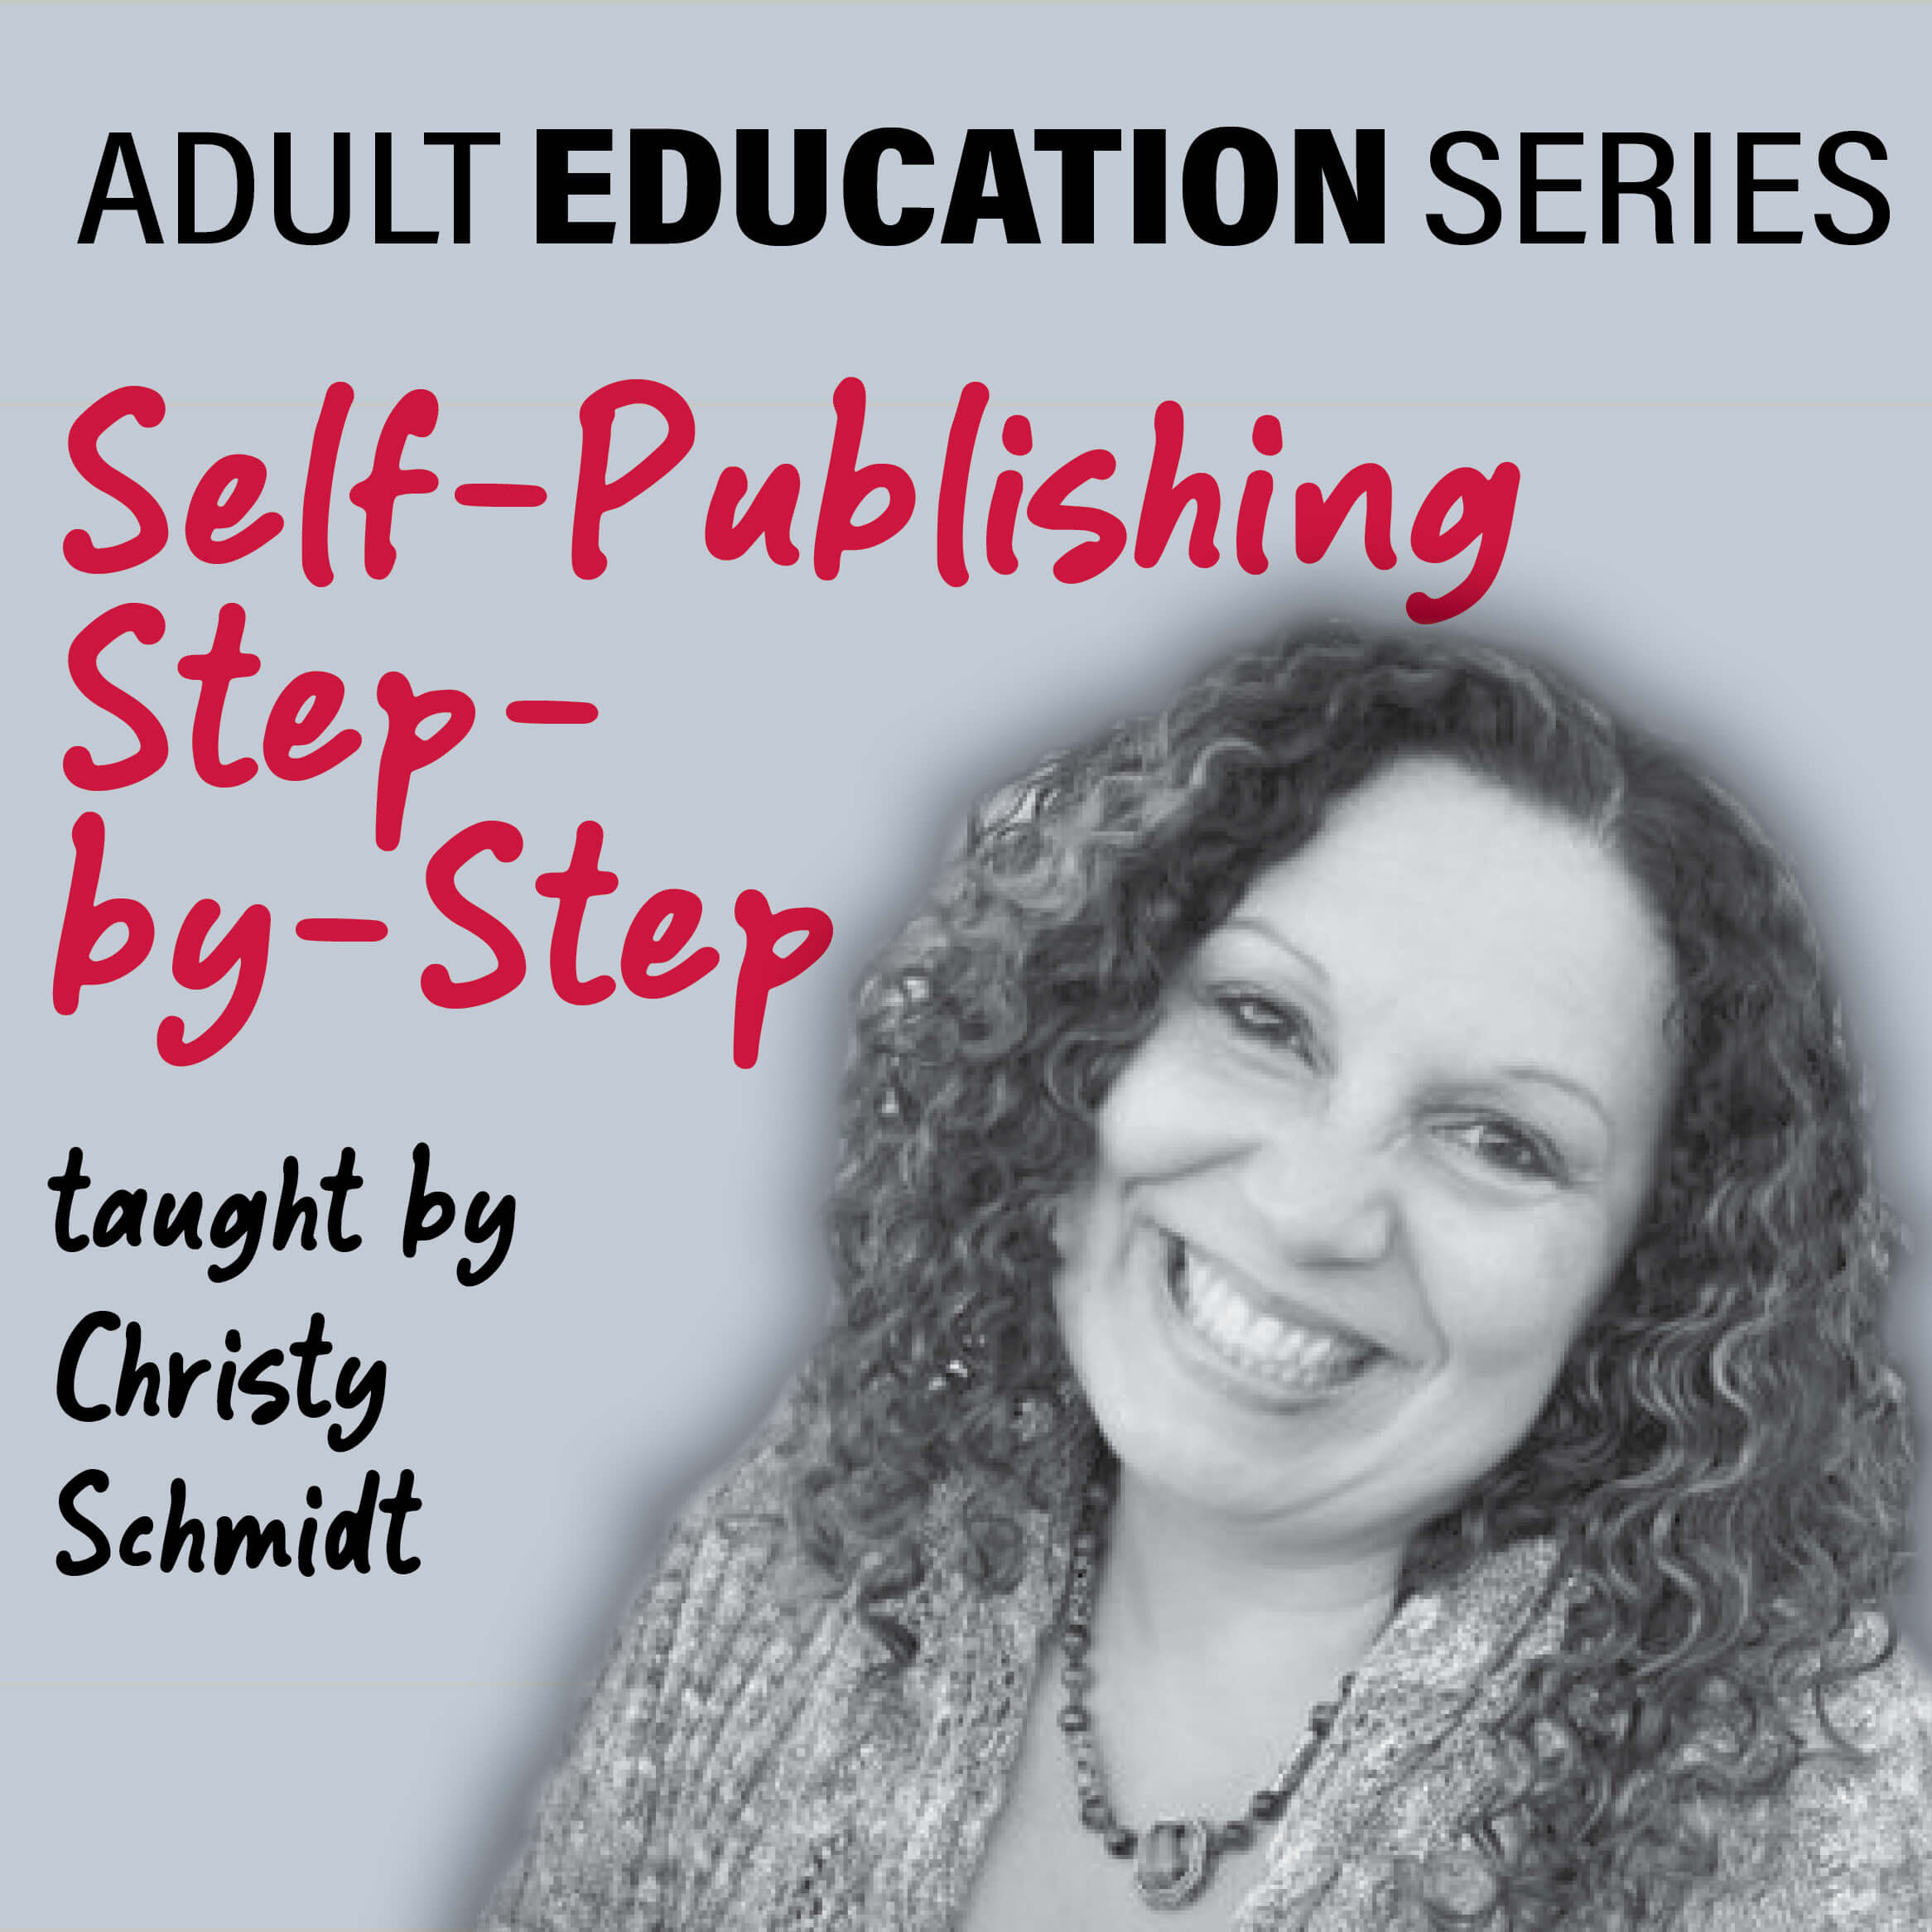 Self-Publishing, Step-by-Step